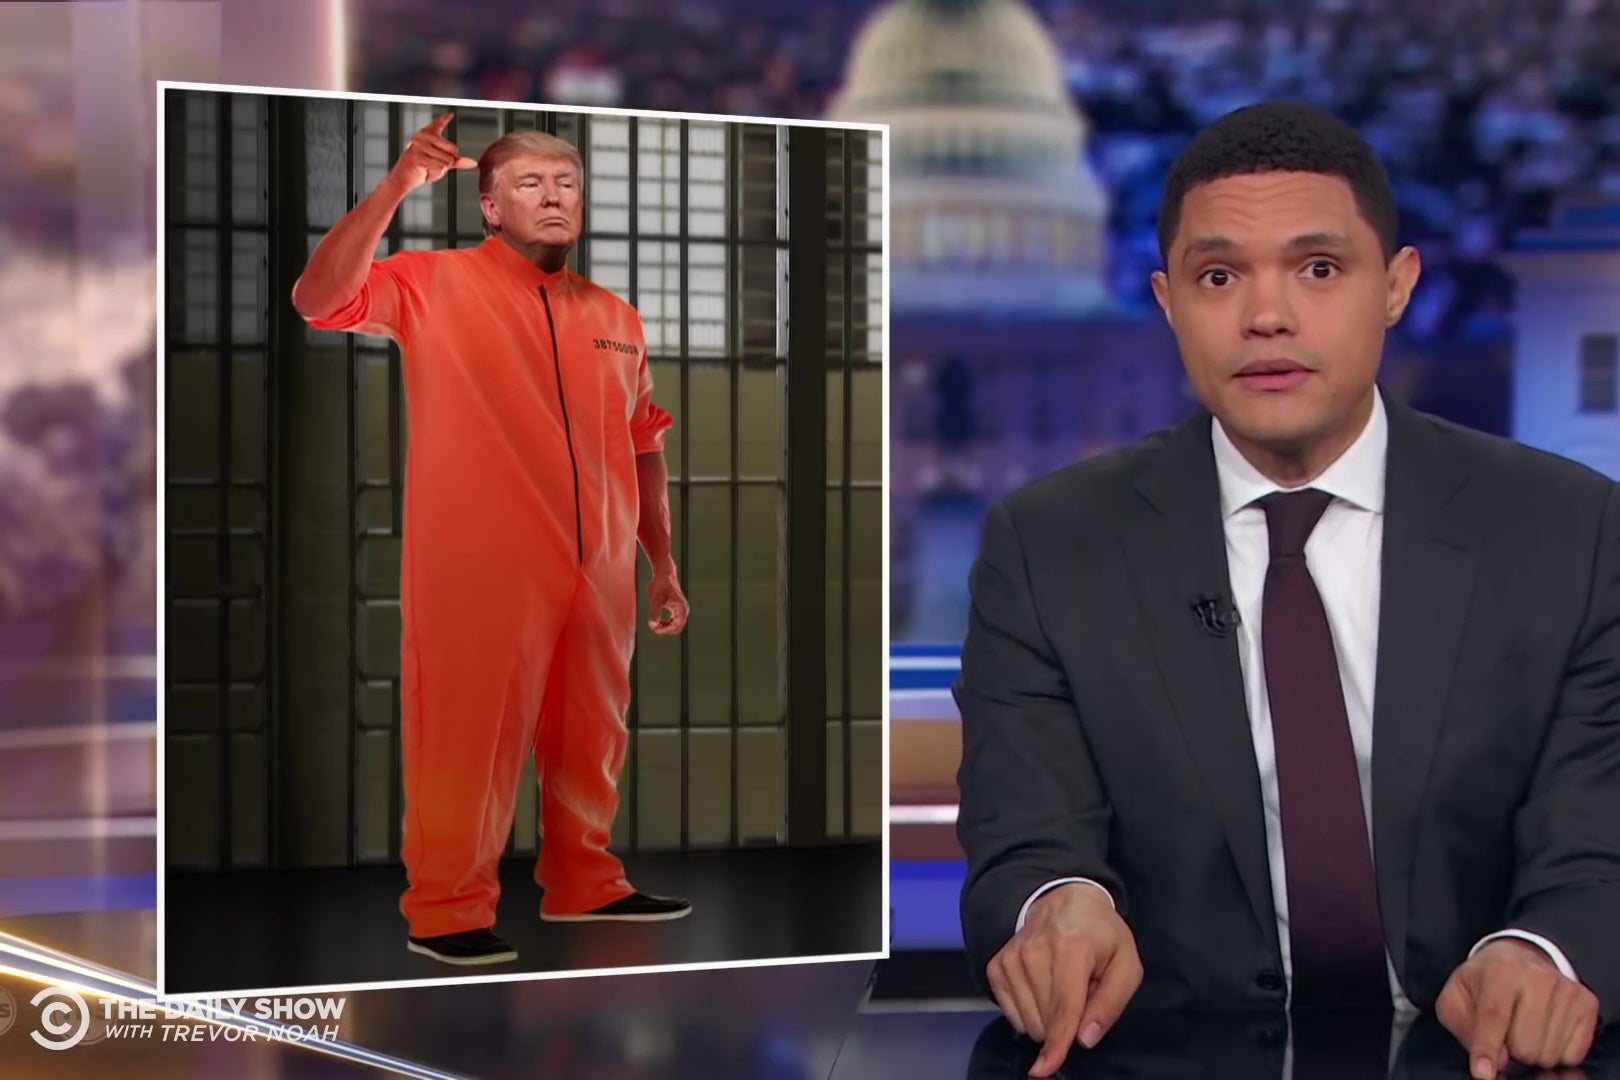 Trevor Noah in front of a Photoshopped image of Trump in a prison jumpsuit.